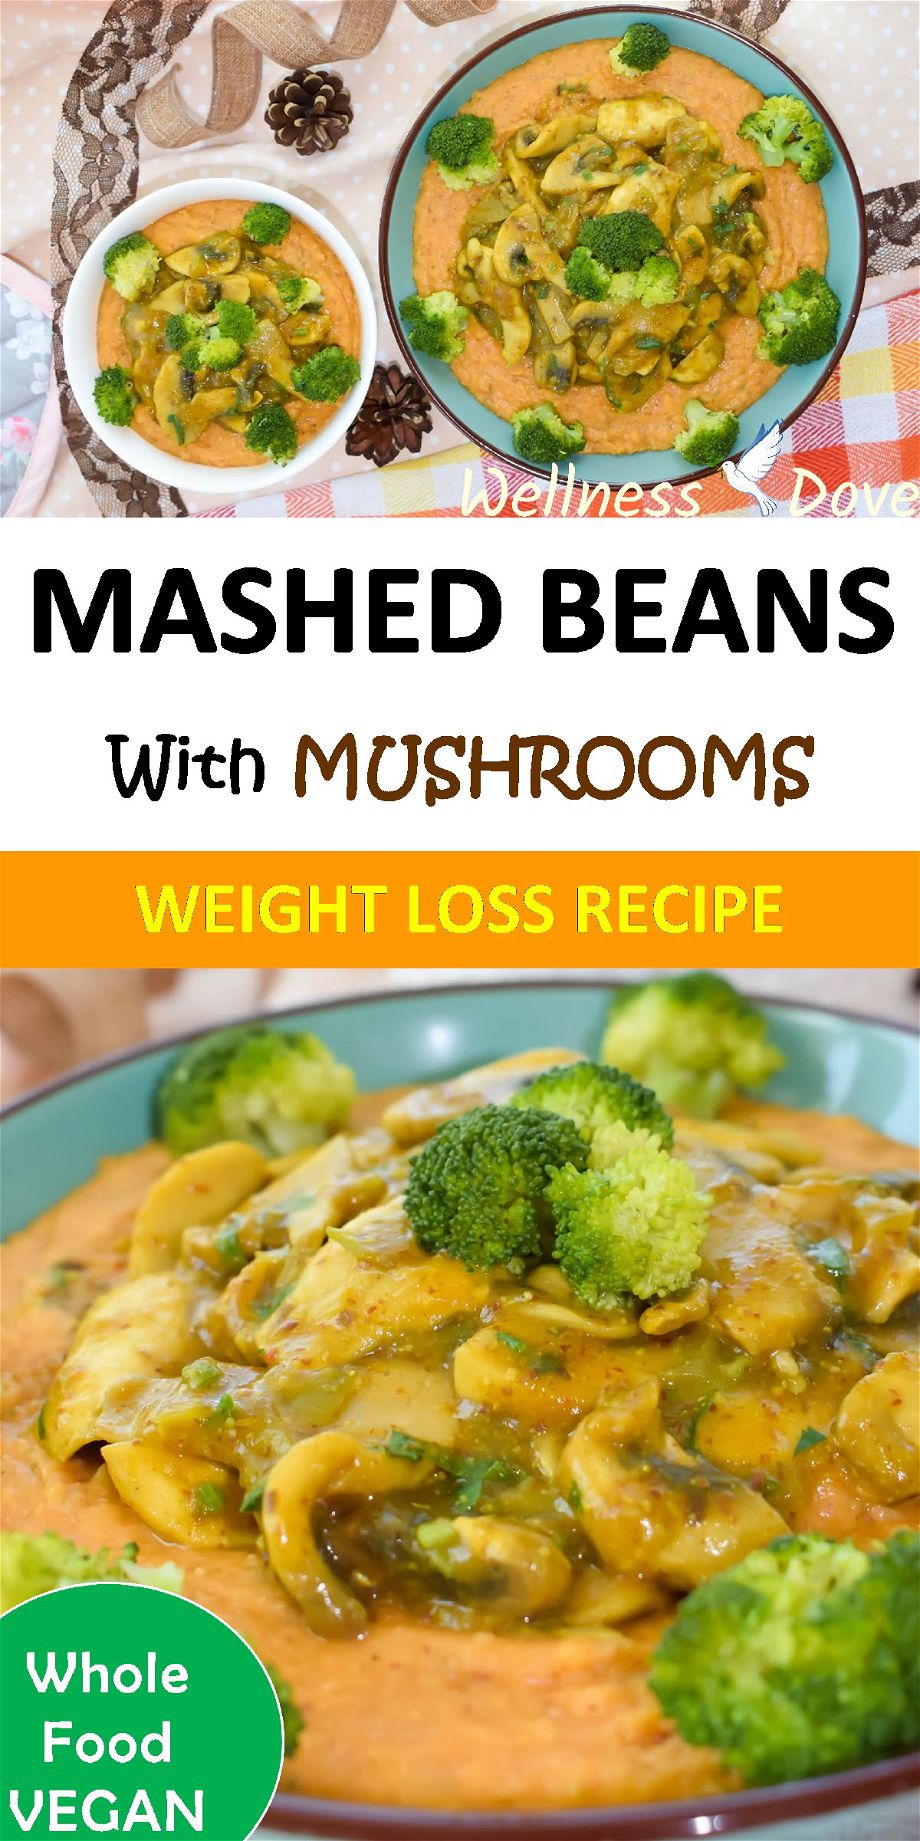 Oil-free recipe with only whole plant food ingredients.The curry powder and garlic add to the eastern note of the mushroom sauce.It combines perfectly with the taste of beans, giving you a rich and satisfying flavor.